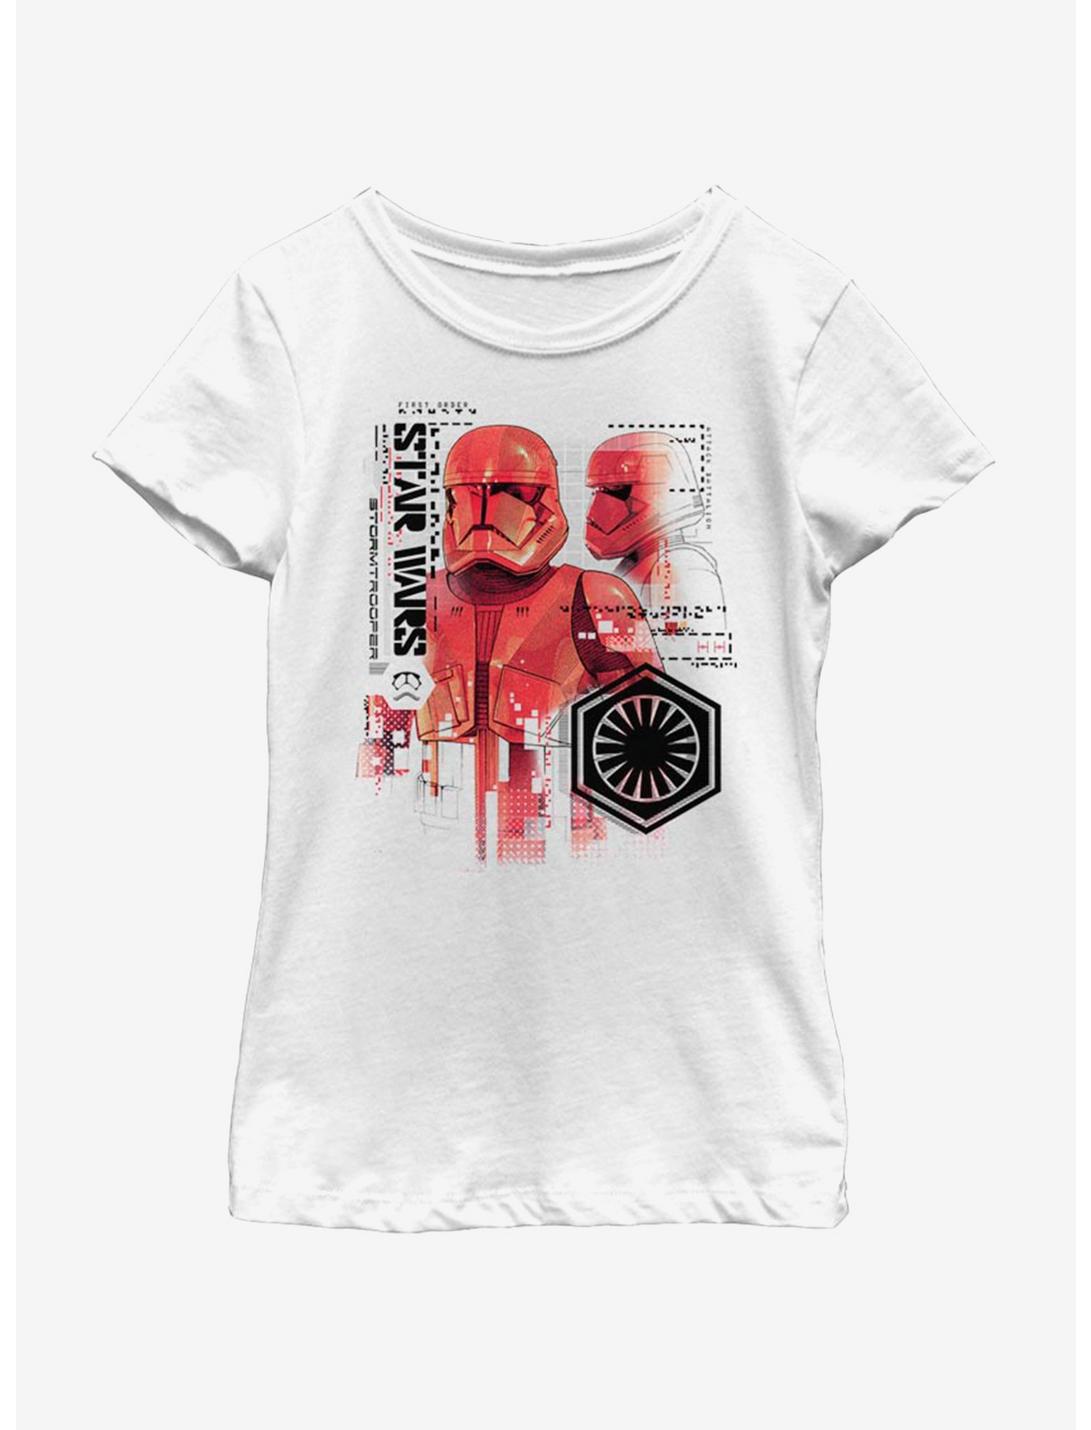 Star Wars The Rise Of Skywalker Red Trooper Schematic Youth Girls T-Shirt, WHITE, hi-res